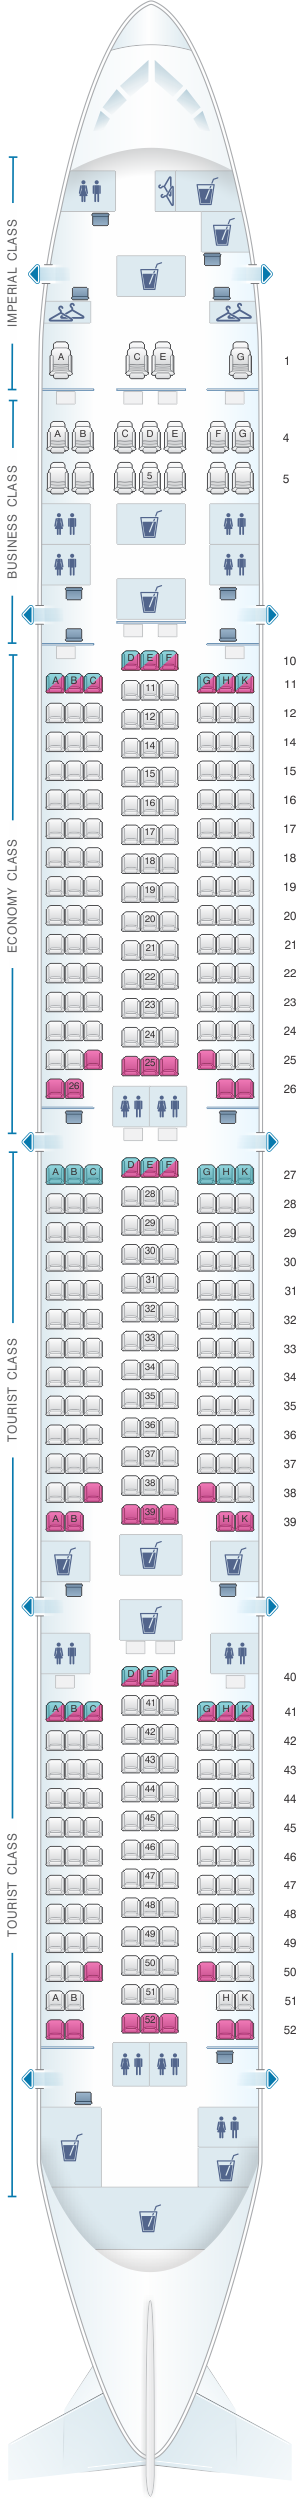 Seat map for Transaero Airlines Boeing B777 300